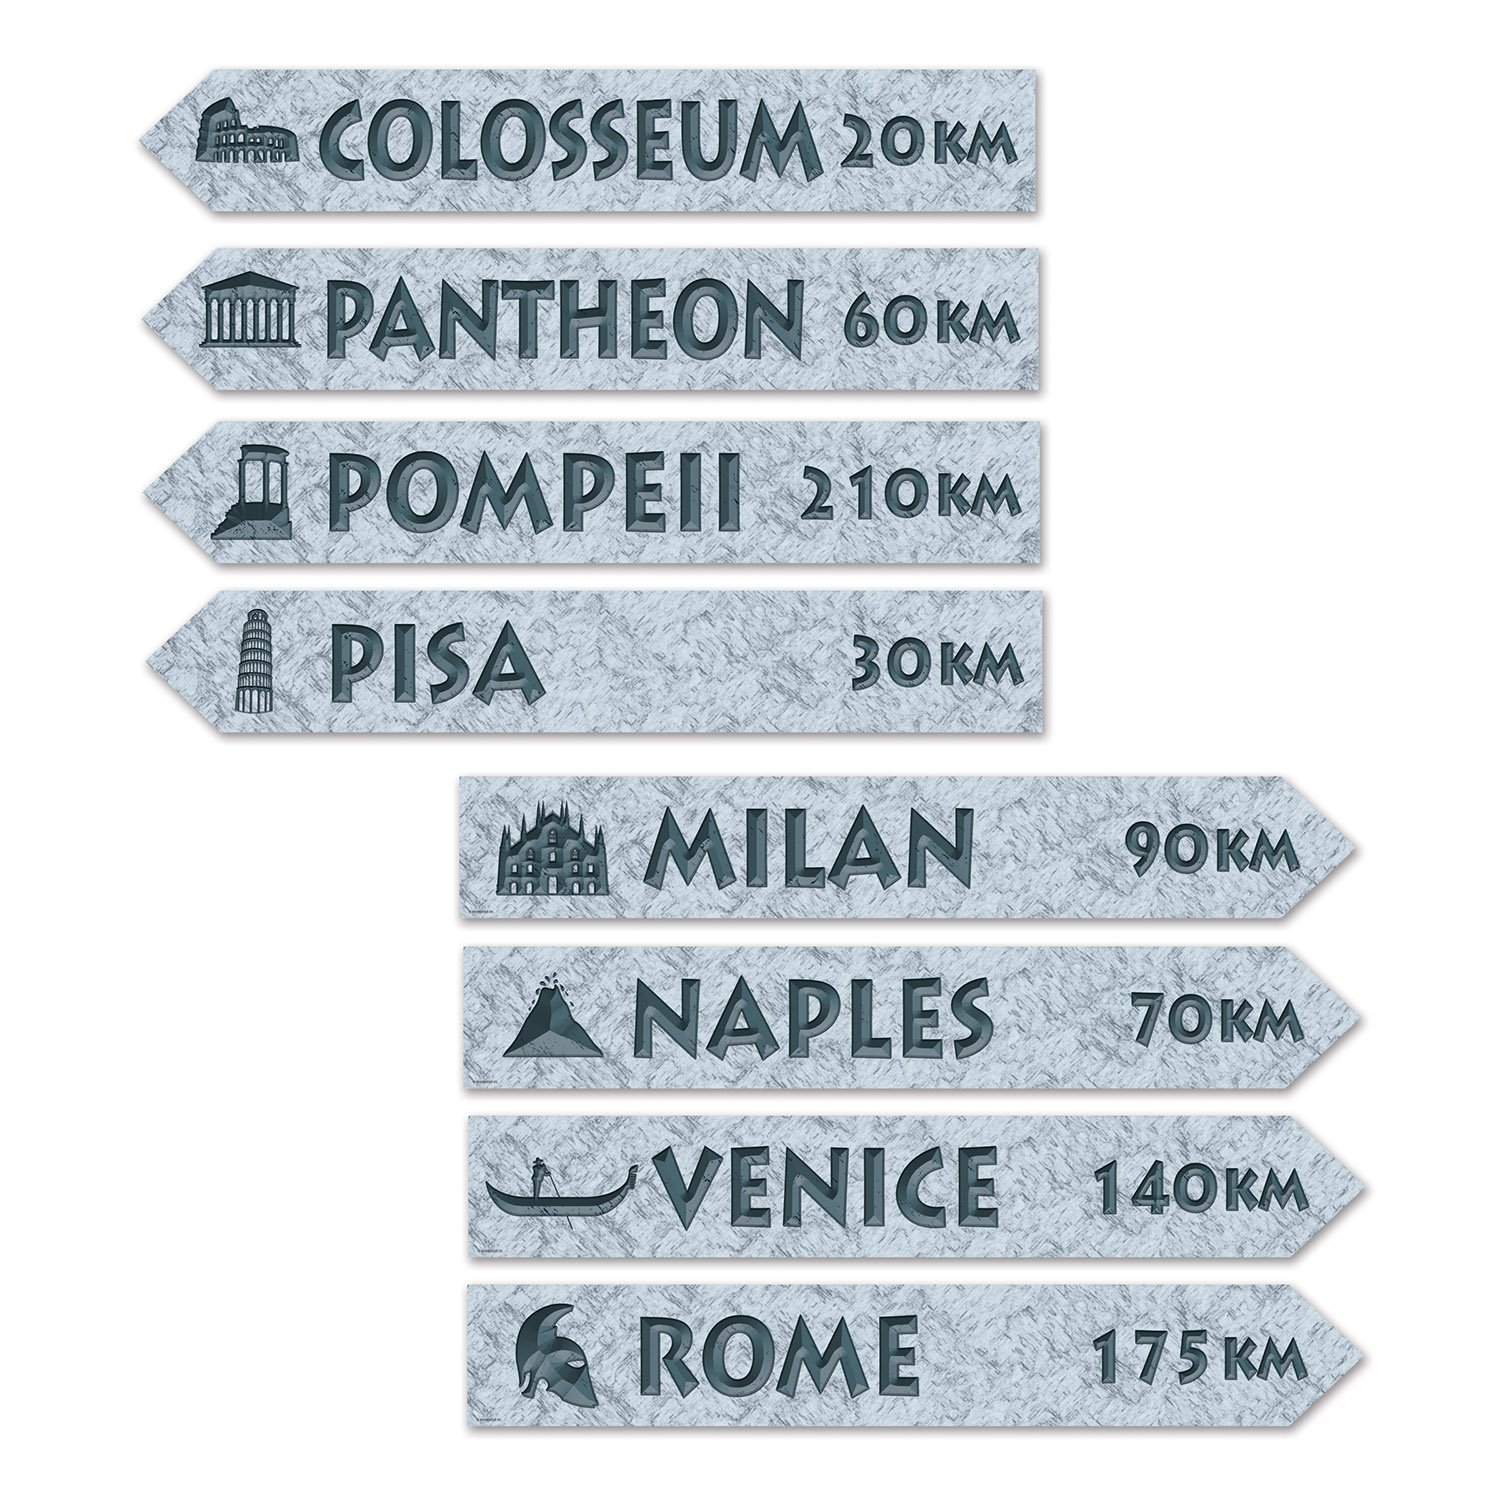 Beistle 4 Piece Italian Theme Street Sign Cut Outs Wall Decorations Italy Party Decorations - image 1 of 2